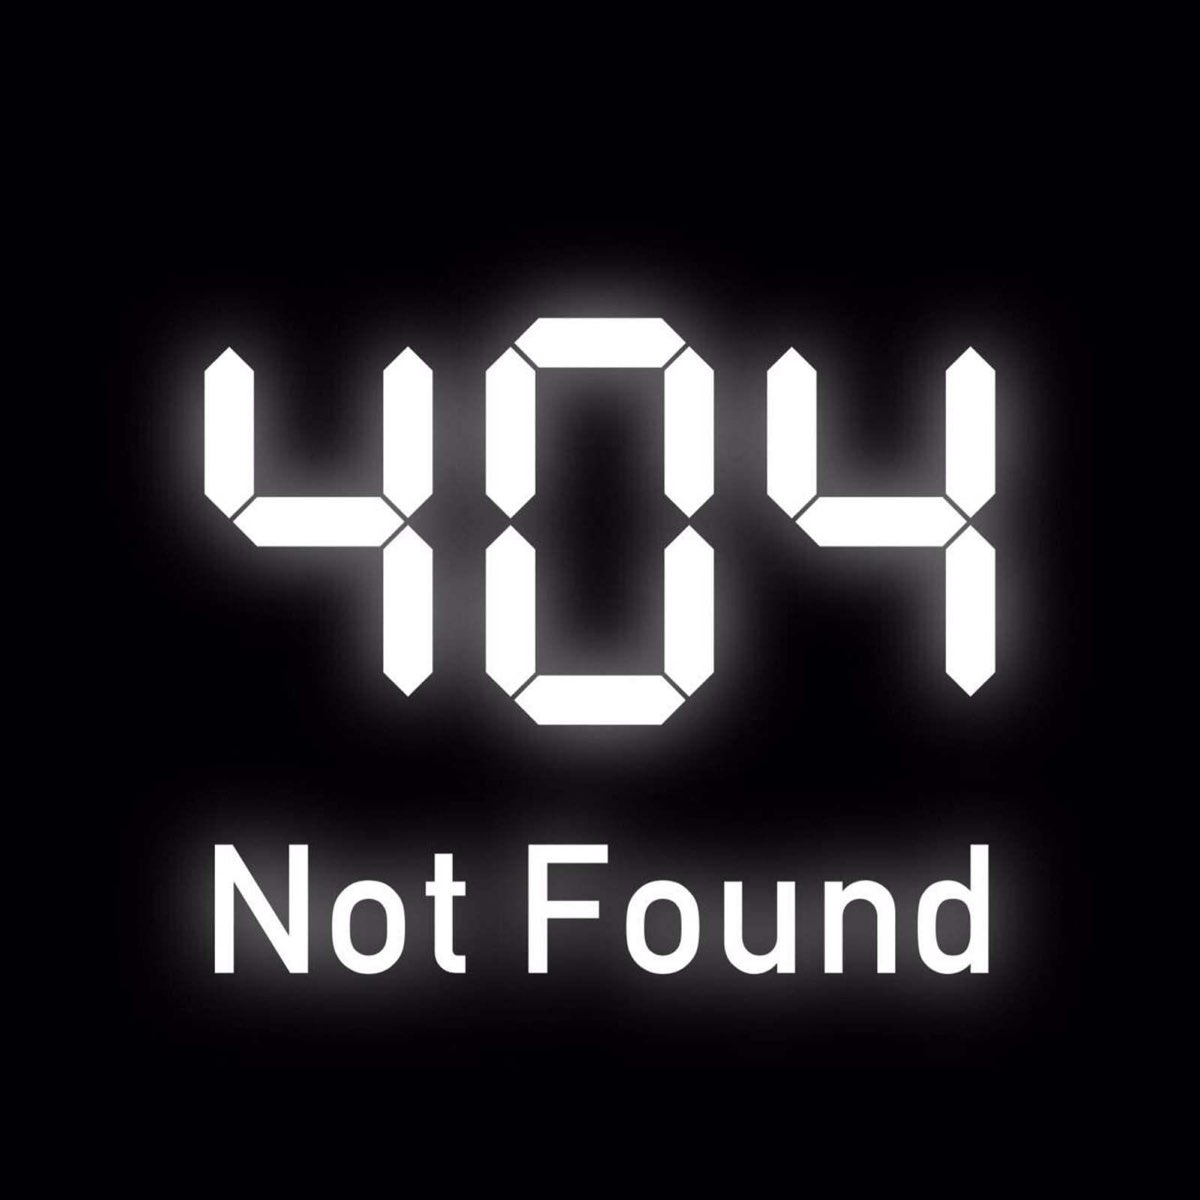 Not found icon. Not found. Error 404 not found. 404 Not found аватарка. 404 Нот фаунд.